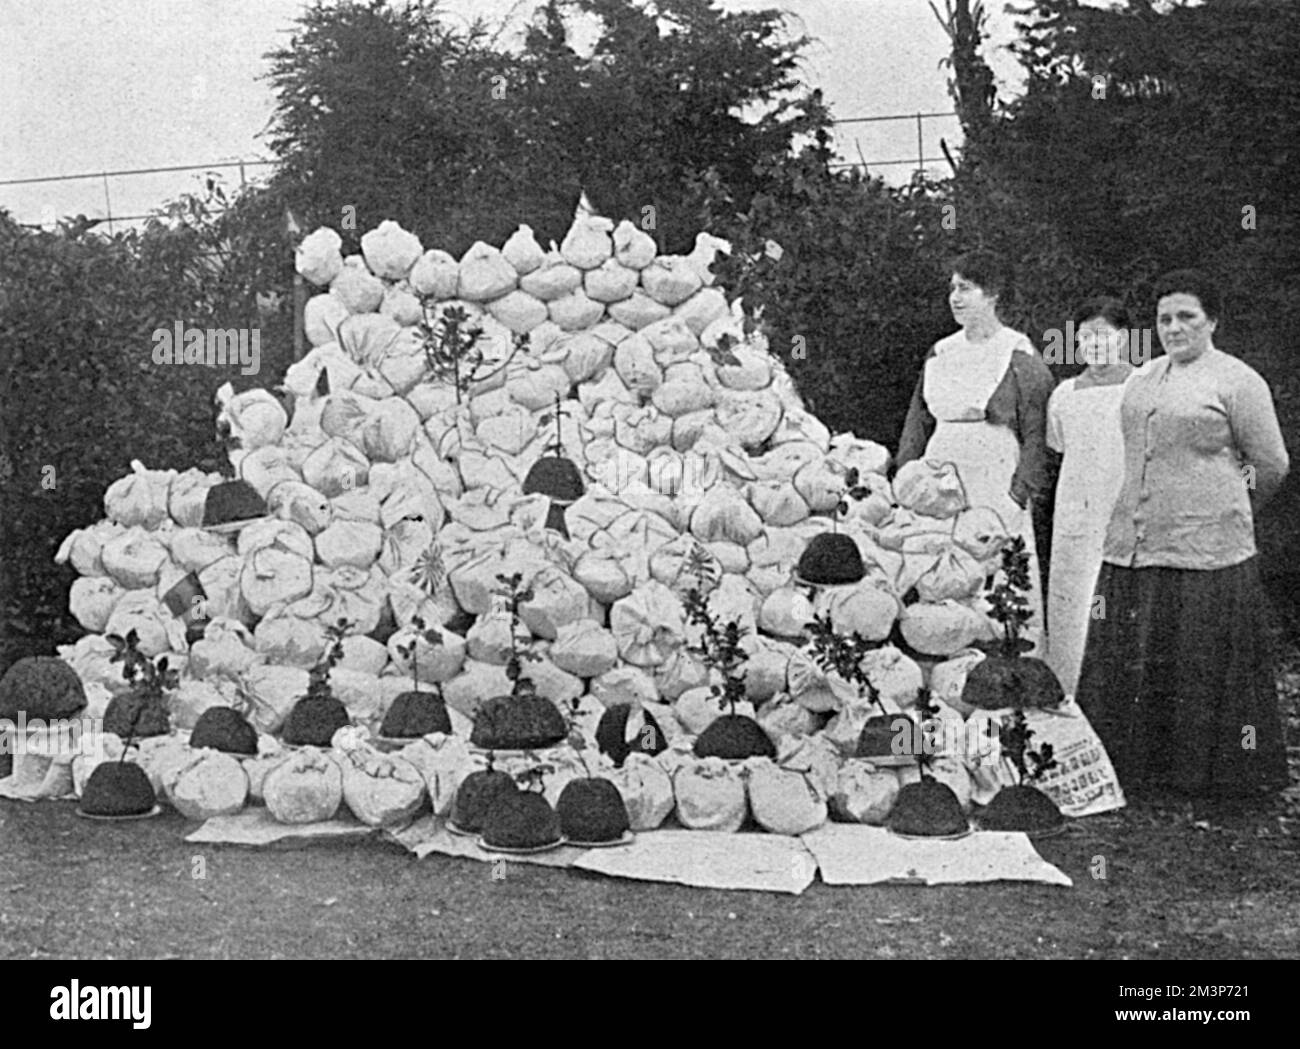 Mrs Buckley of Birmingham, the wife of Captain Frank Buckley of the 17th Middlesex Regiment, with her impressive pile of 420 hand-cooked Christmas puddings for Birmingham soldiers at the front.       Date: 1915 Stock Photo